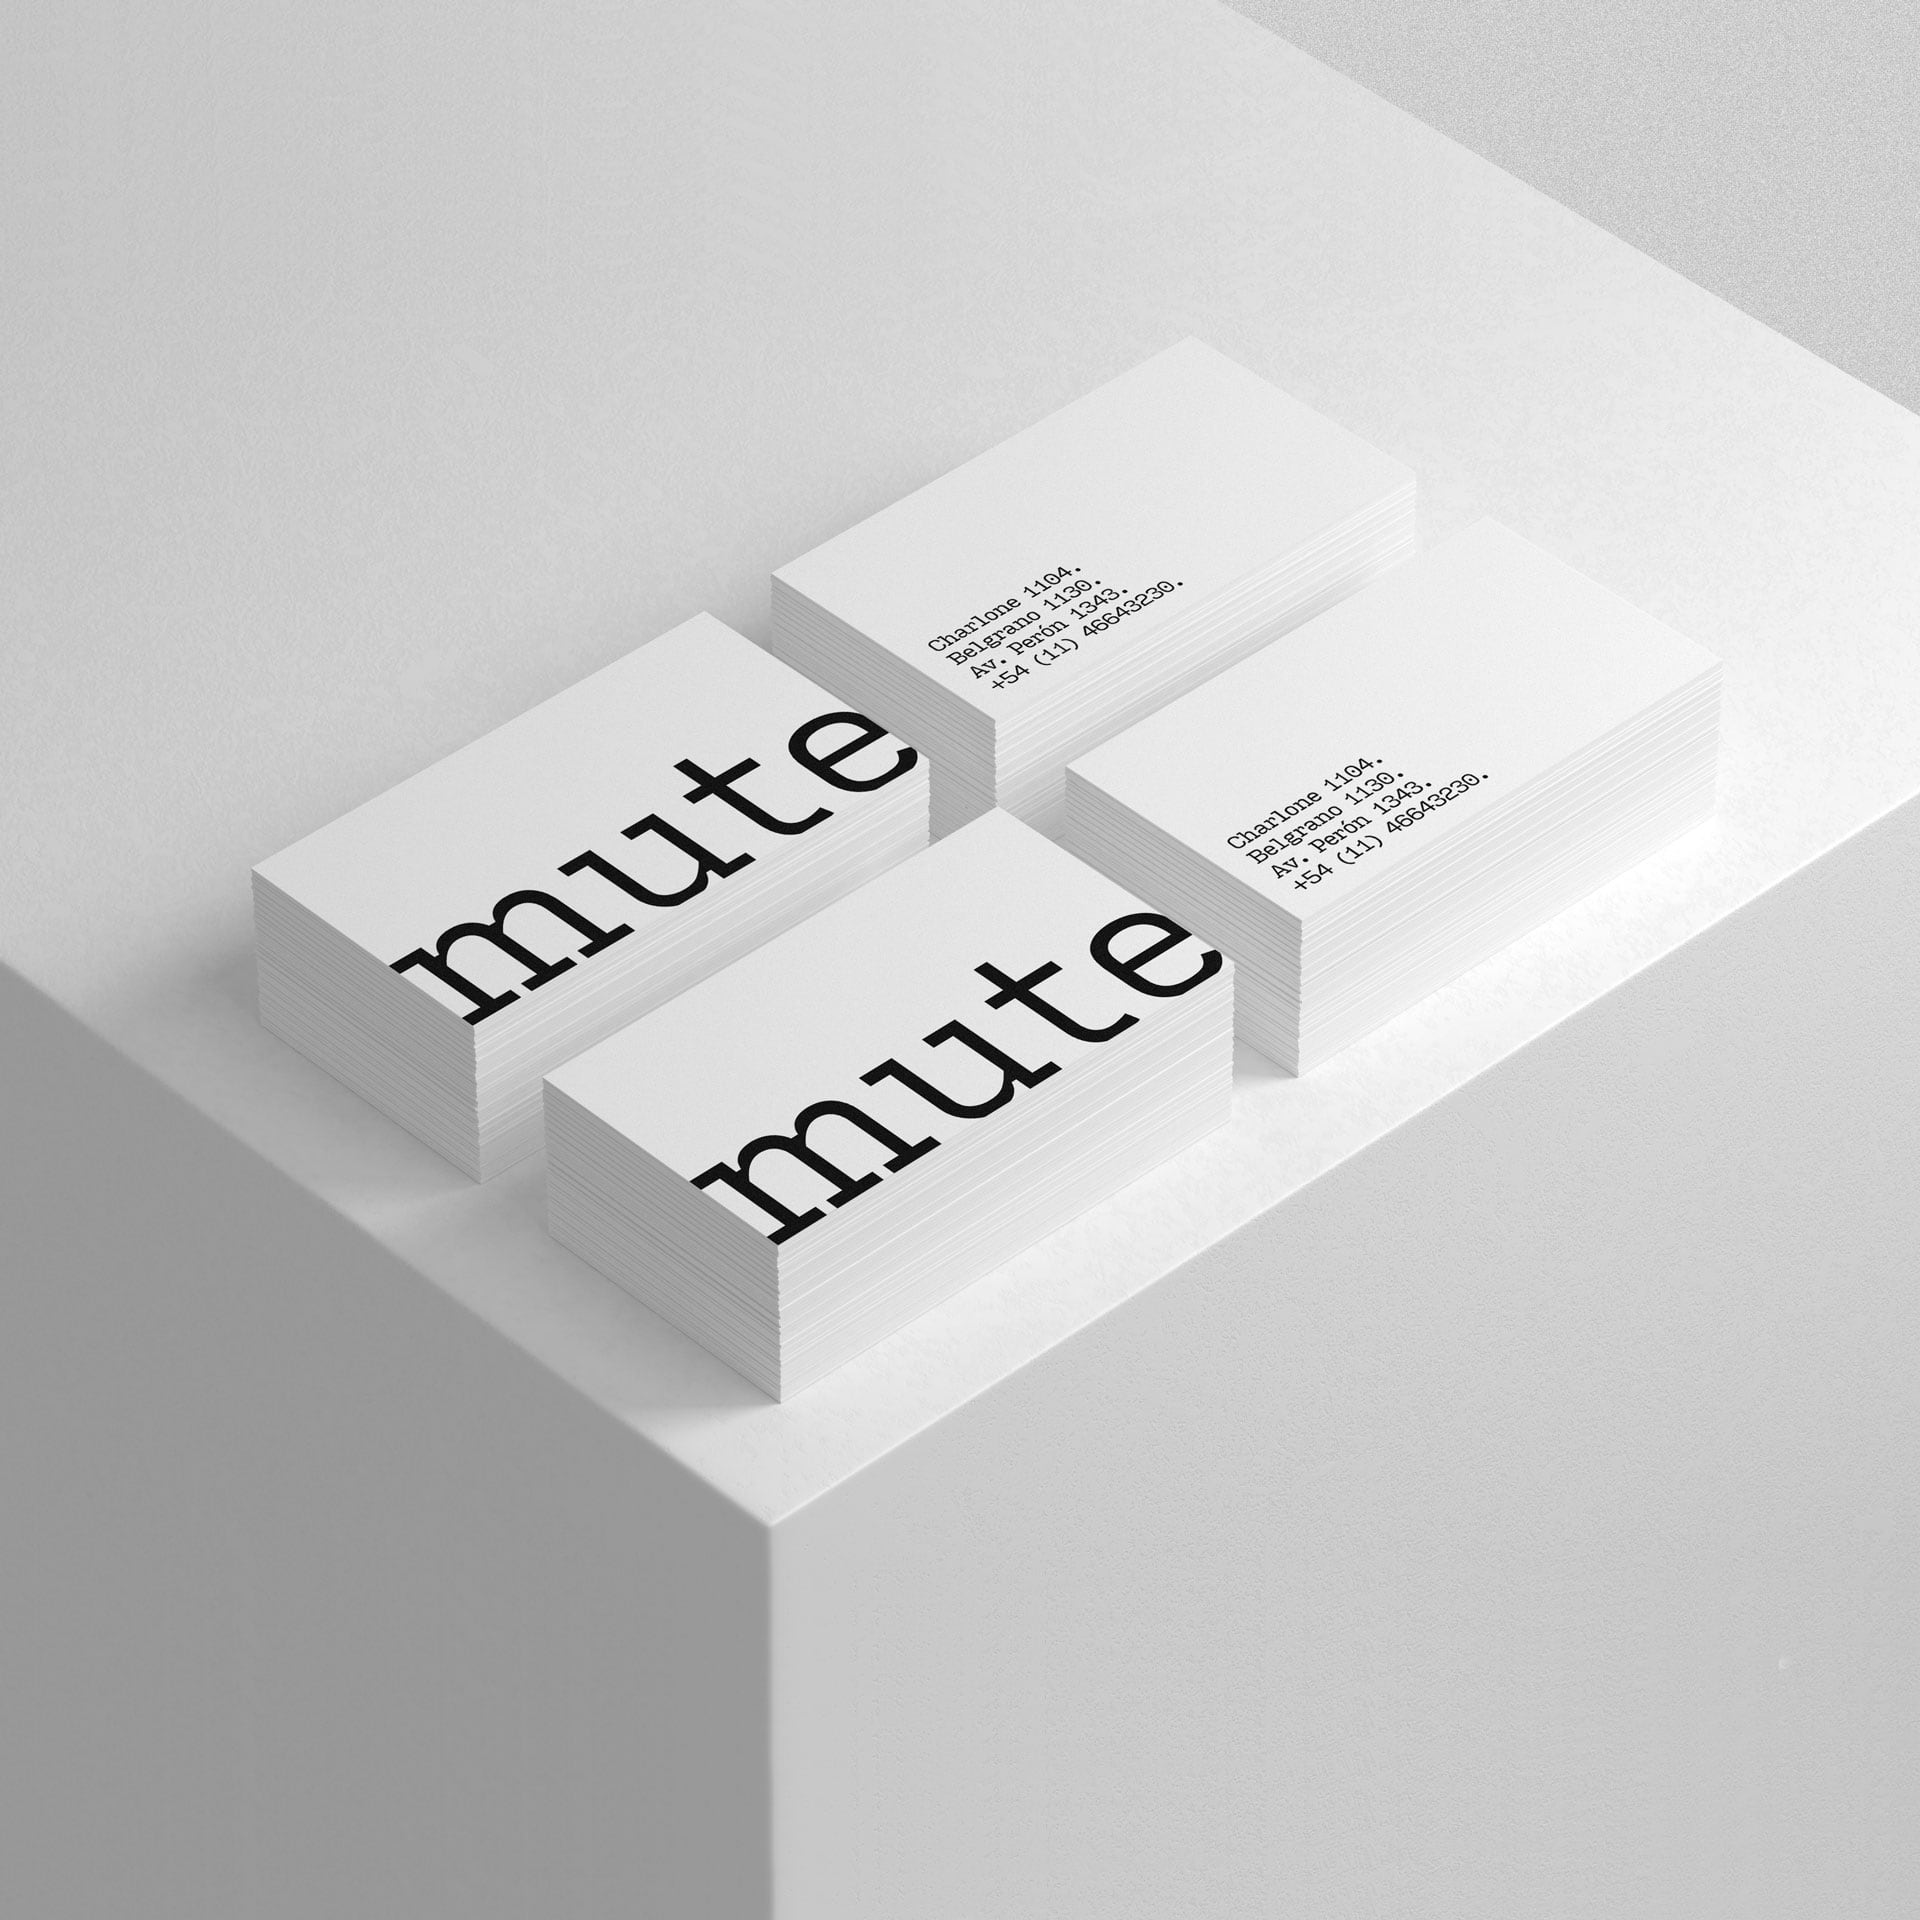 Mute. Name. Design Agency.